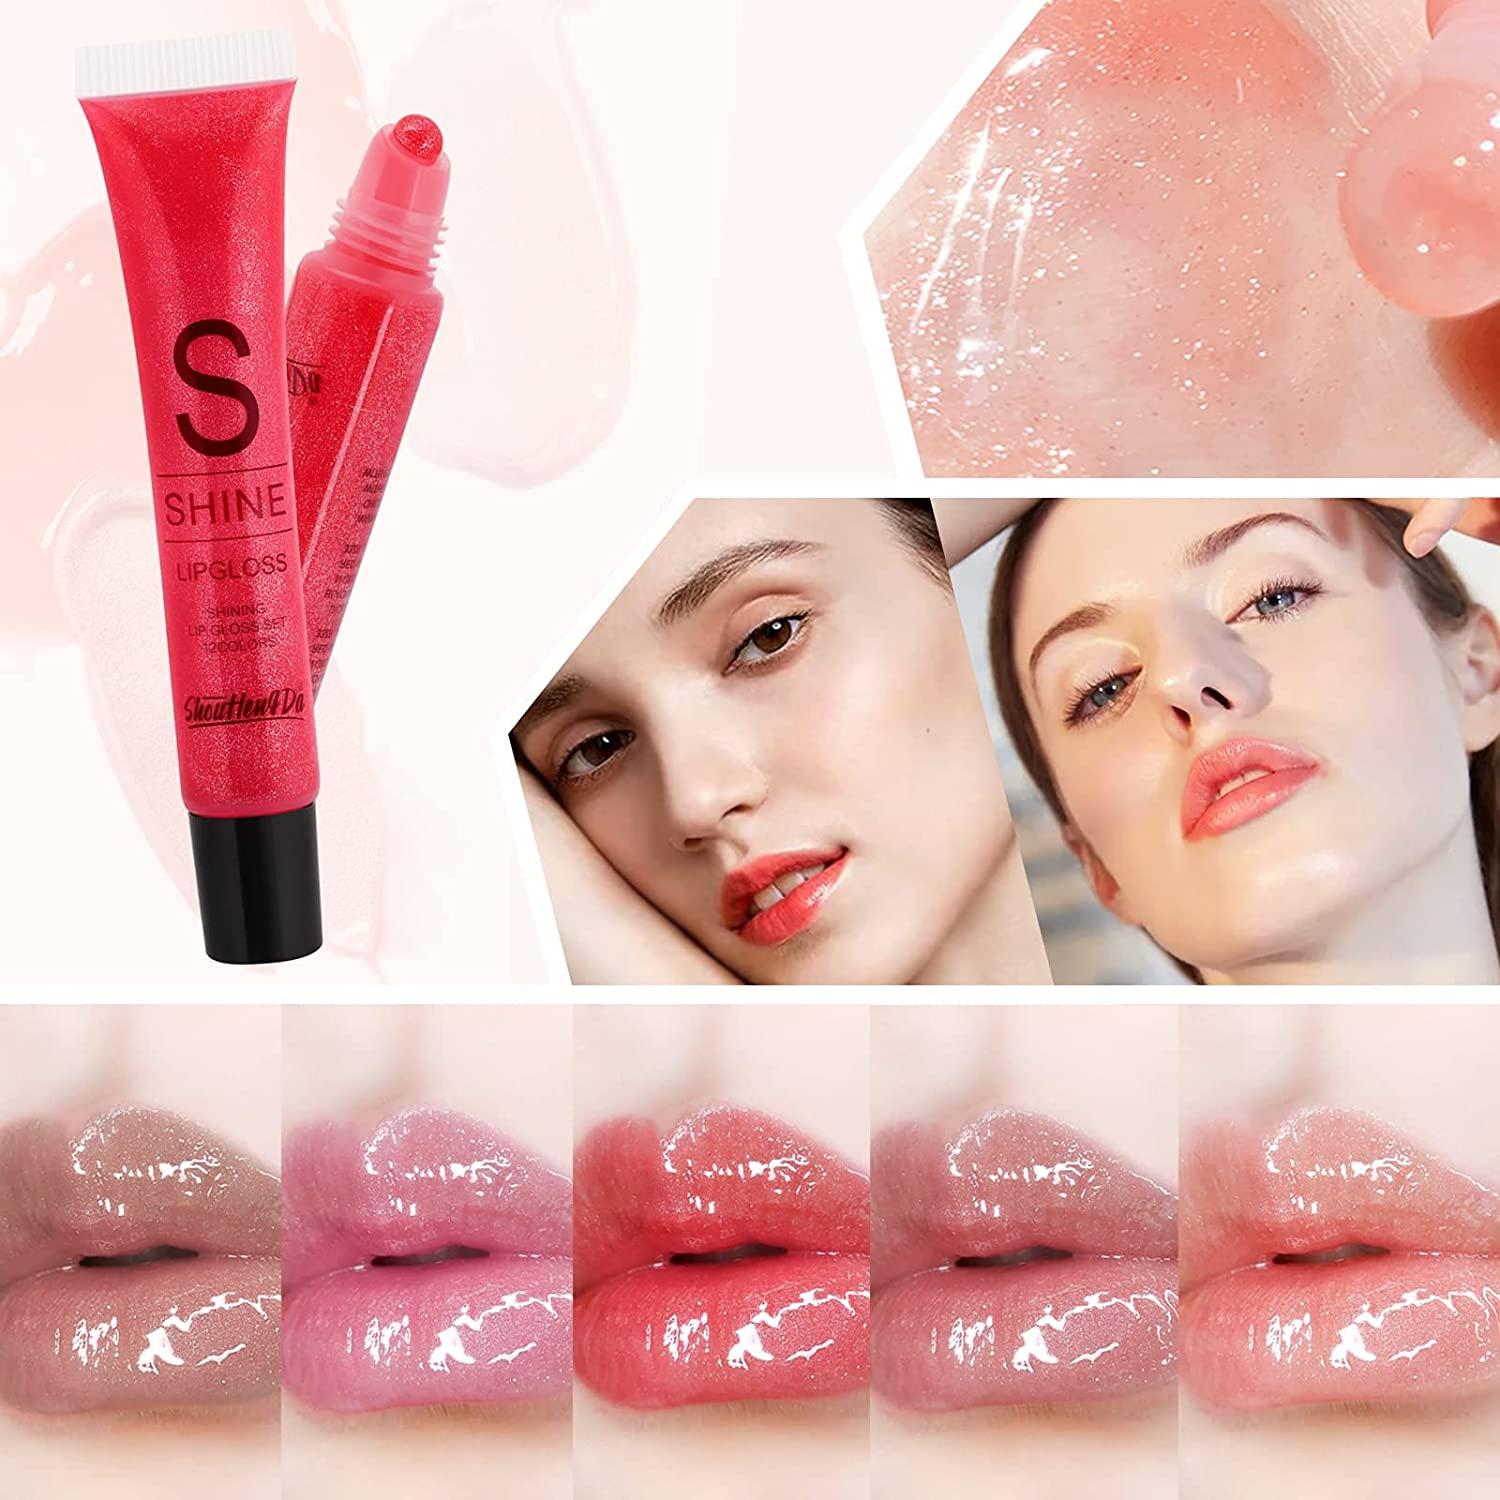 12 Color Lip Gloss Set,12Pc Shimmery Lipgloss Sets for Women and